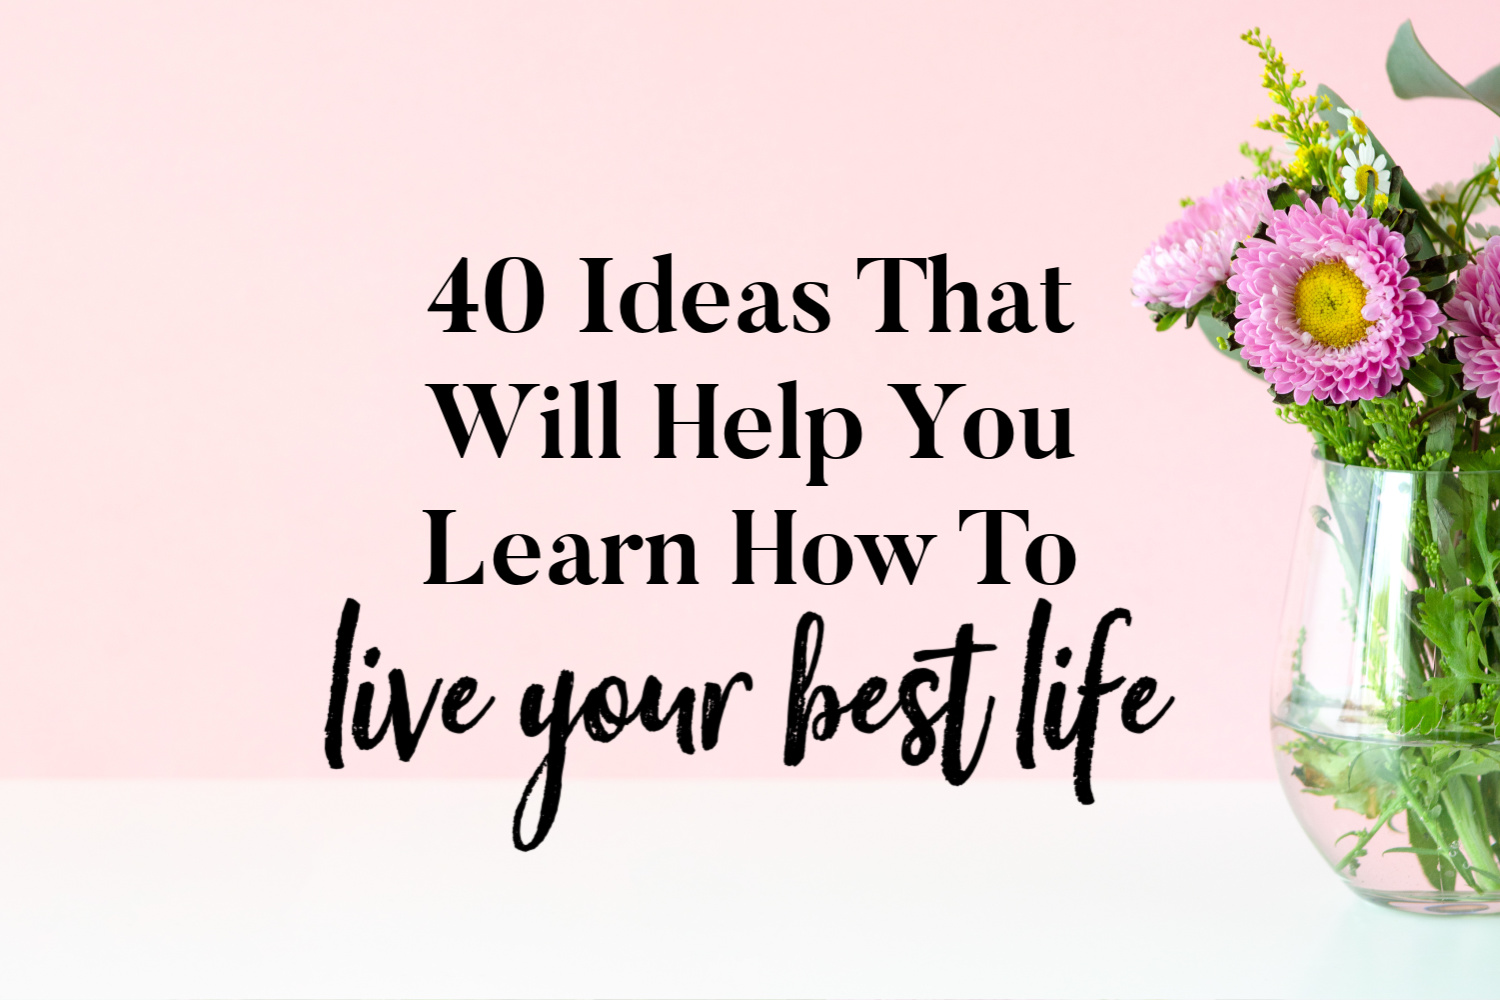 40 Ideas That Will Help You Learn How To Live Your Best Life